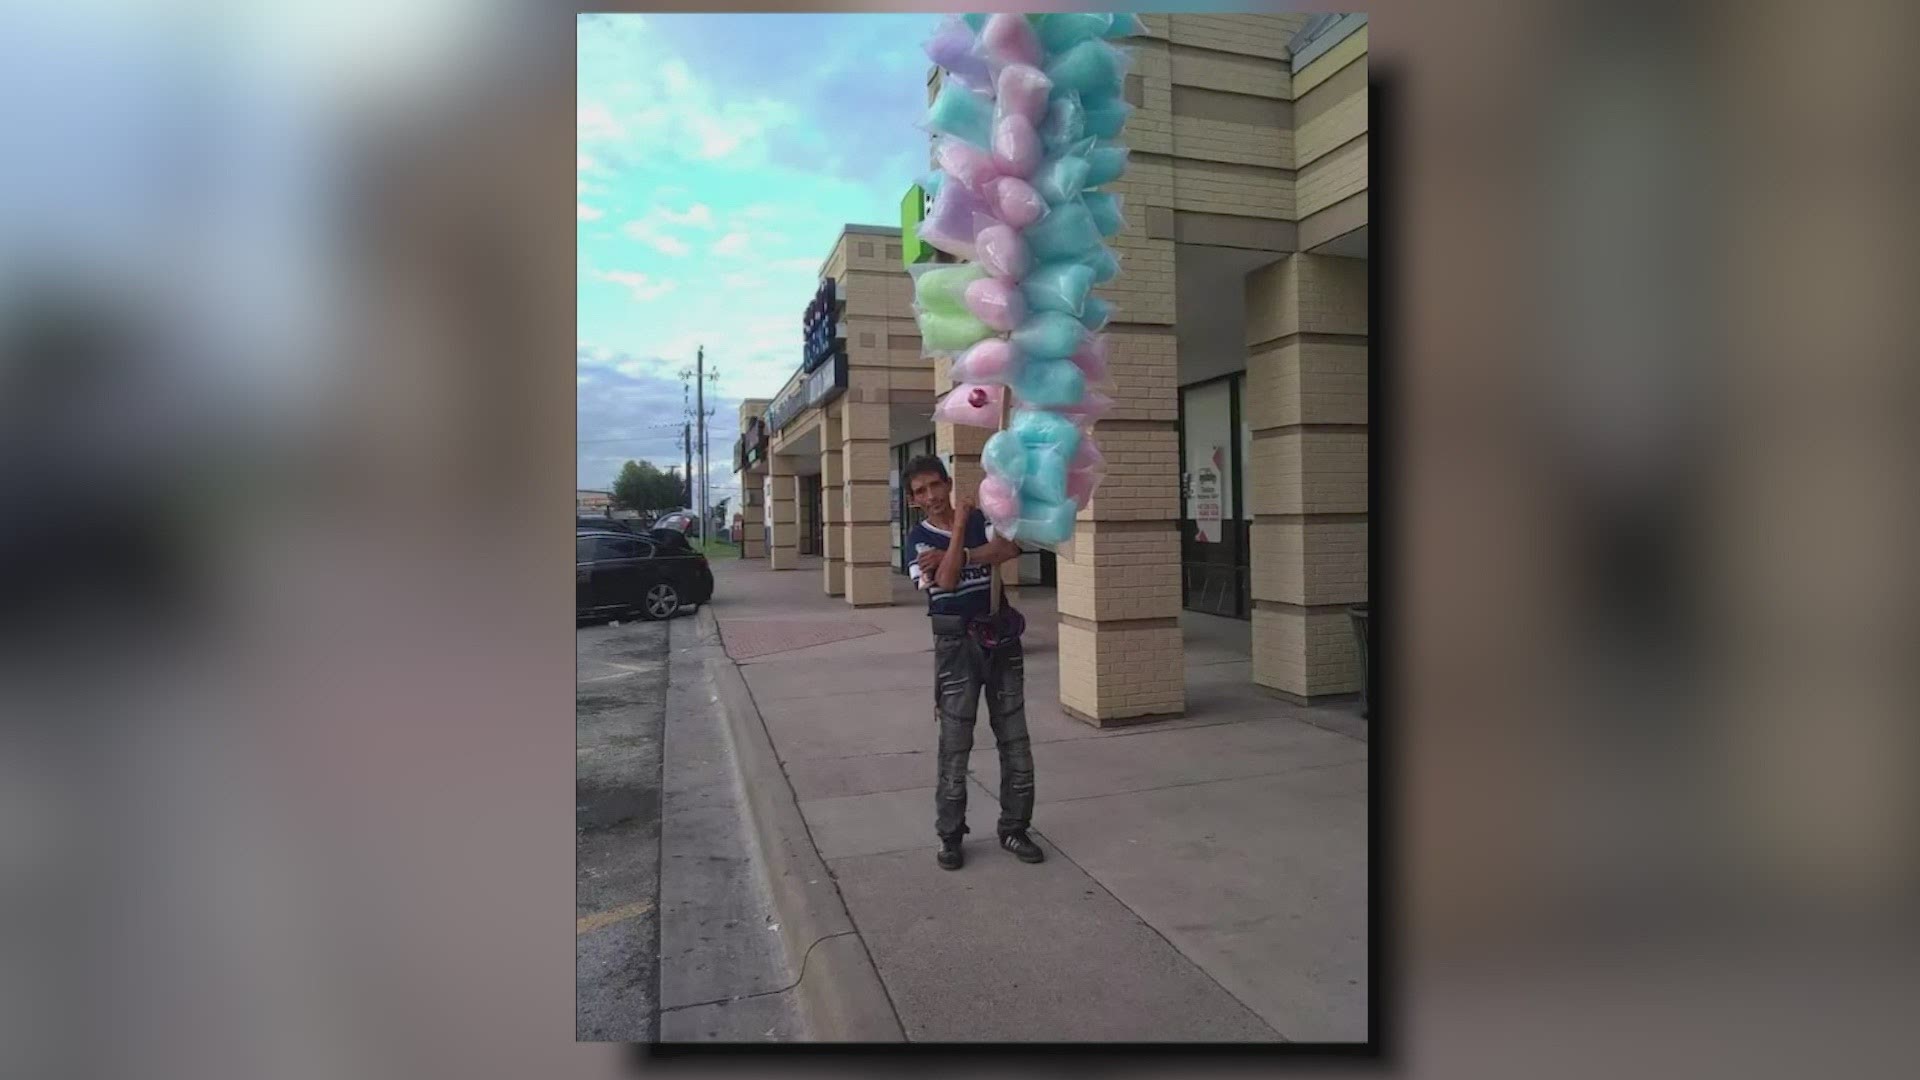 The 60-year-old was known for his cotton candy and helping other street vendors. He was found dead in his rented room on Tuesday morning.